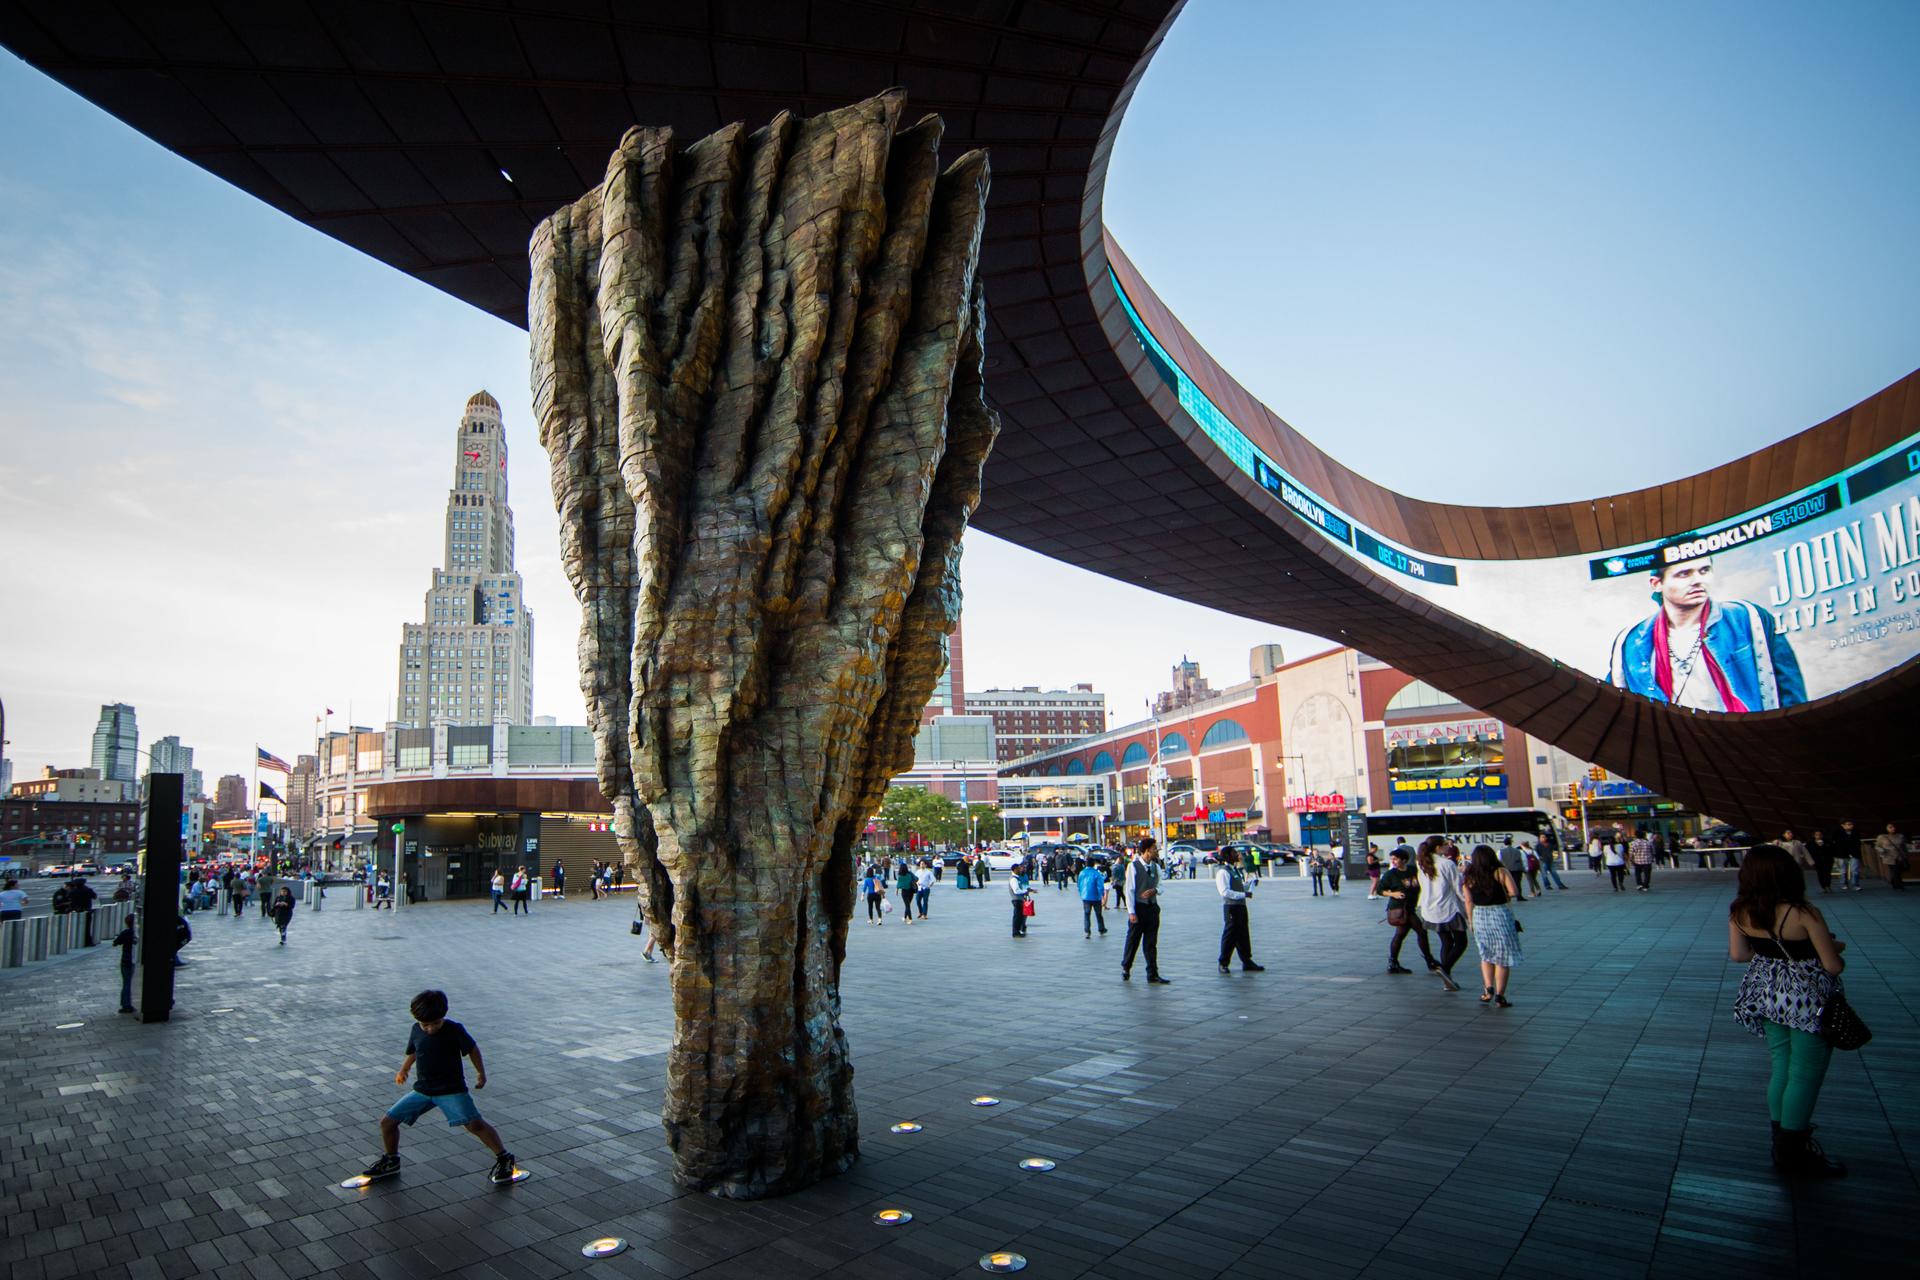 The Ursula von Rydingsvard sculpture “ONA,” 2013, at the Barclays Center in Brooklyn.